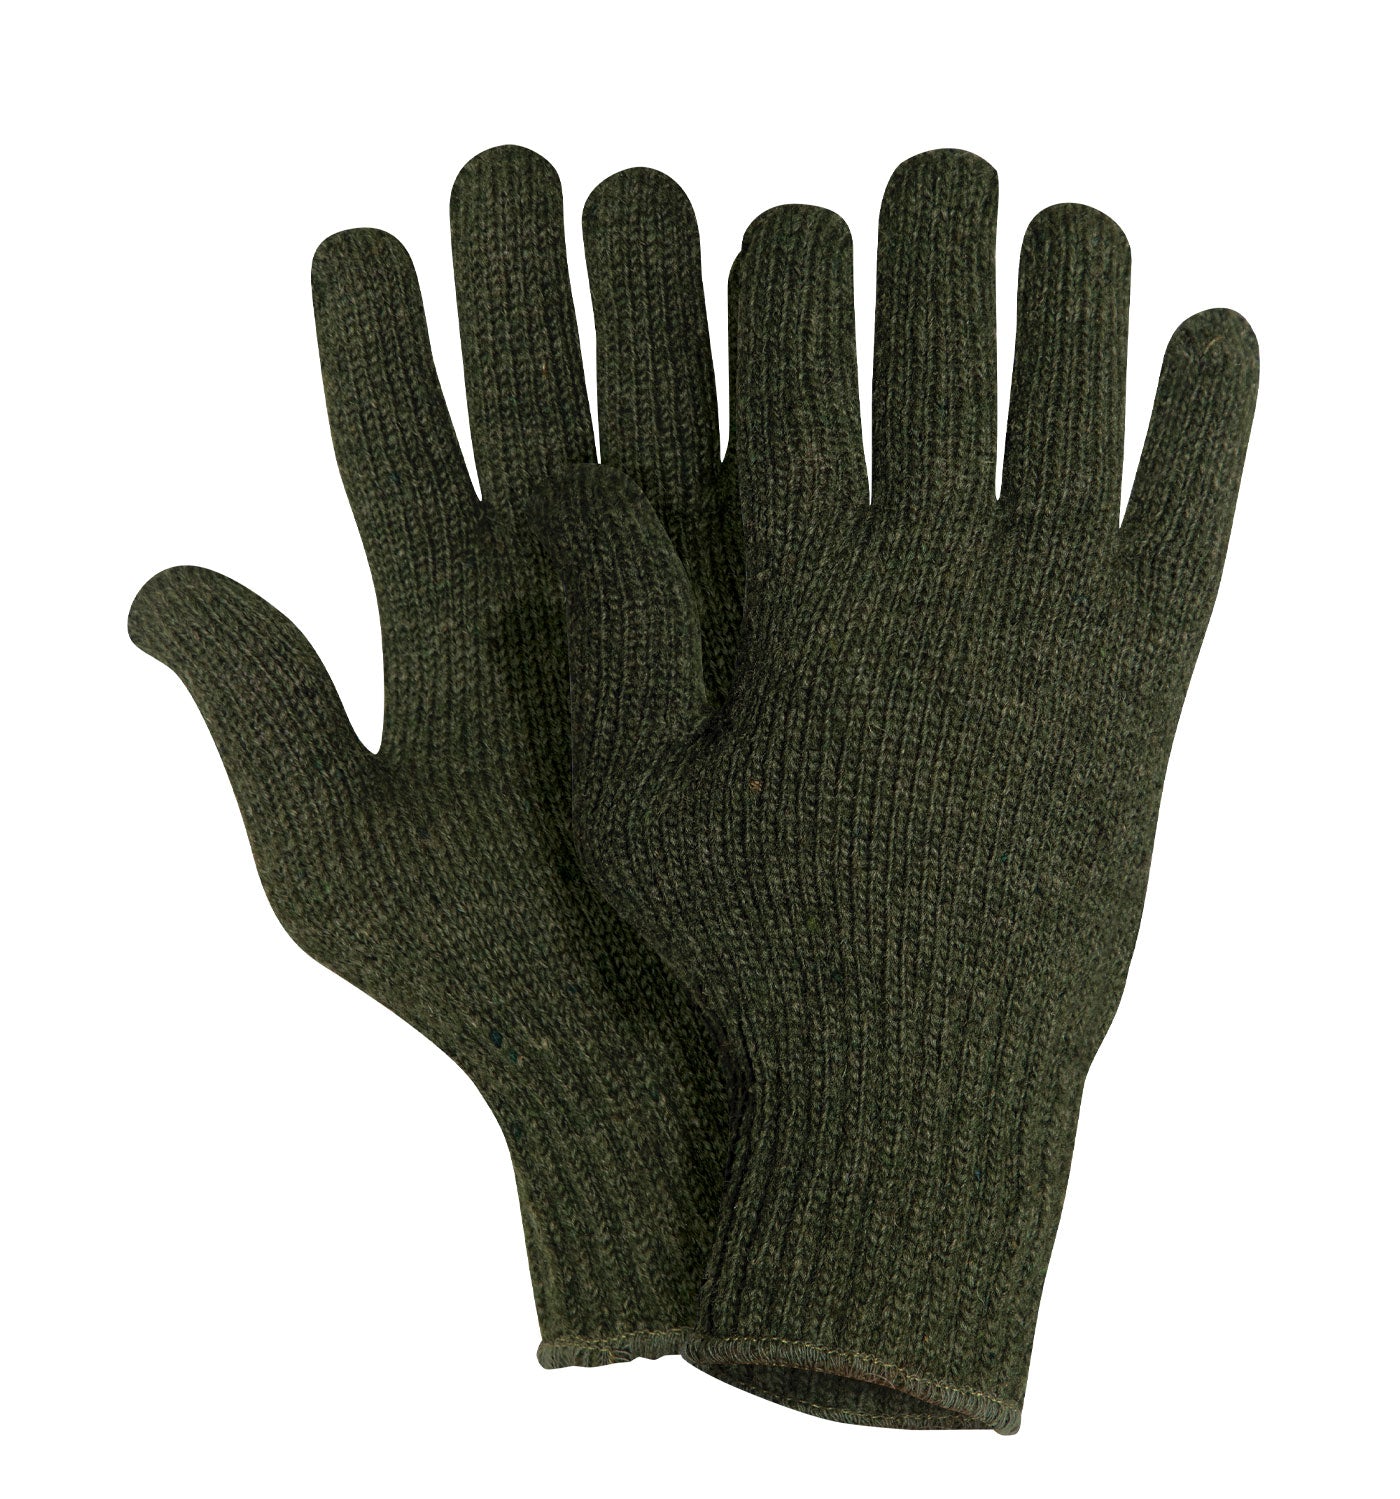 Milspec Wool Glove Liners - Unstamped Cold Weather Gloves MilTac Tactical Military Outdoor Gear Australia